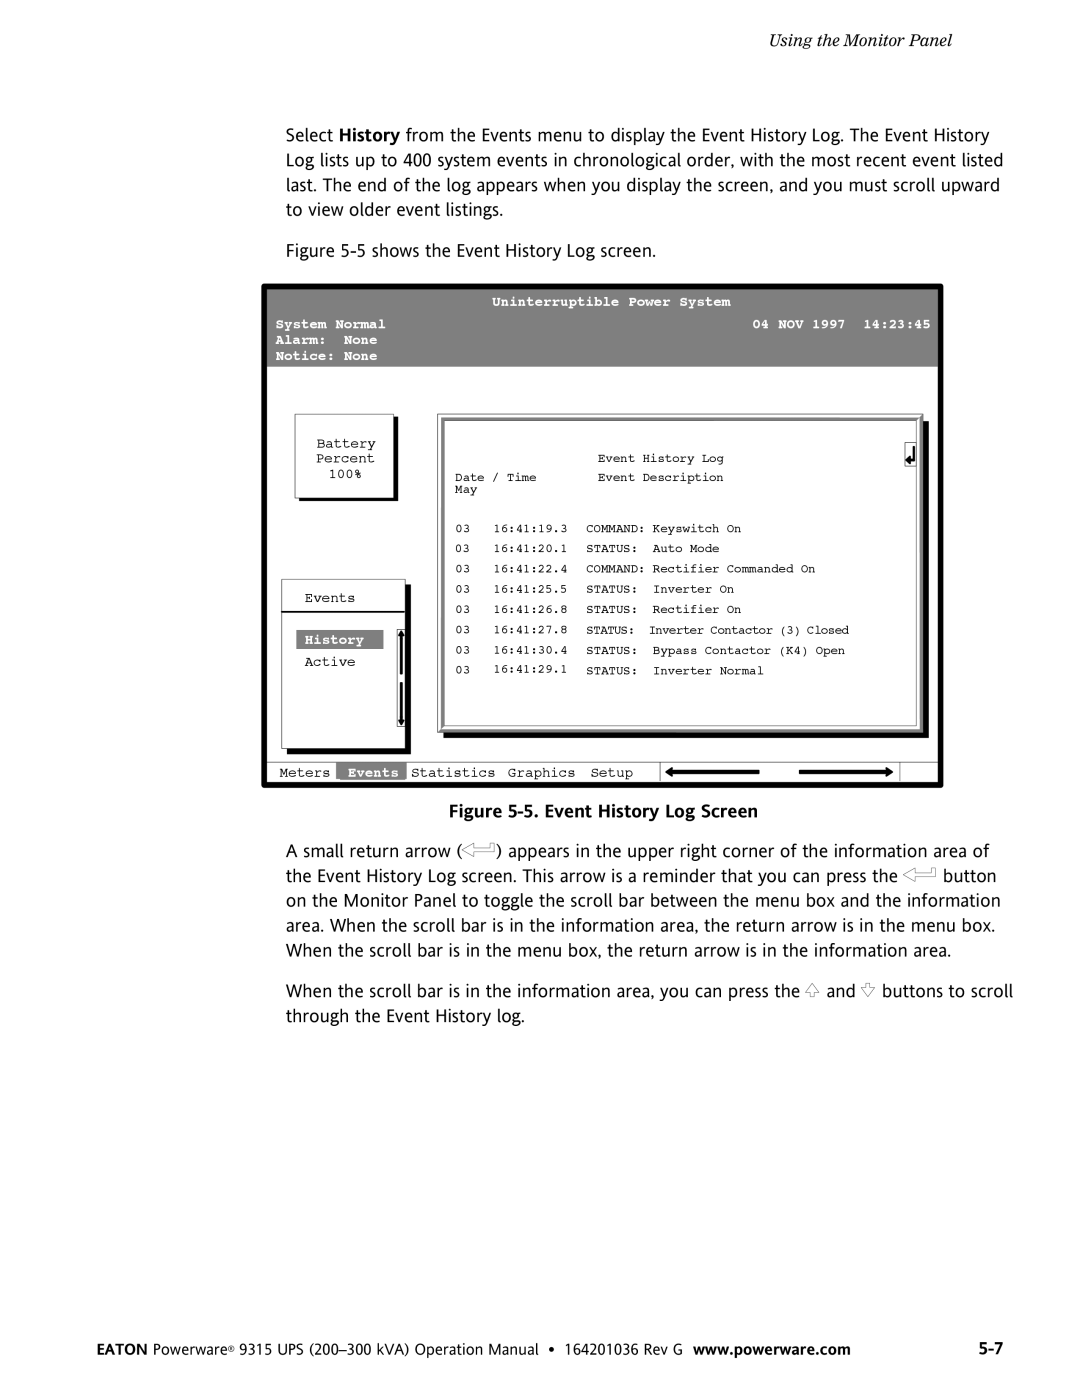 Powerware 9315 UPS operation manual 5shows the Event History Log screen 